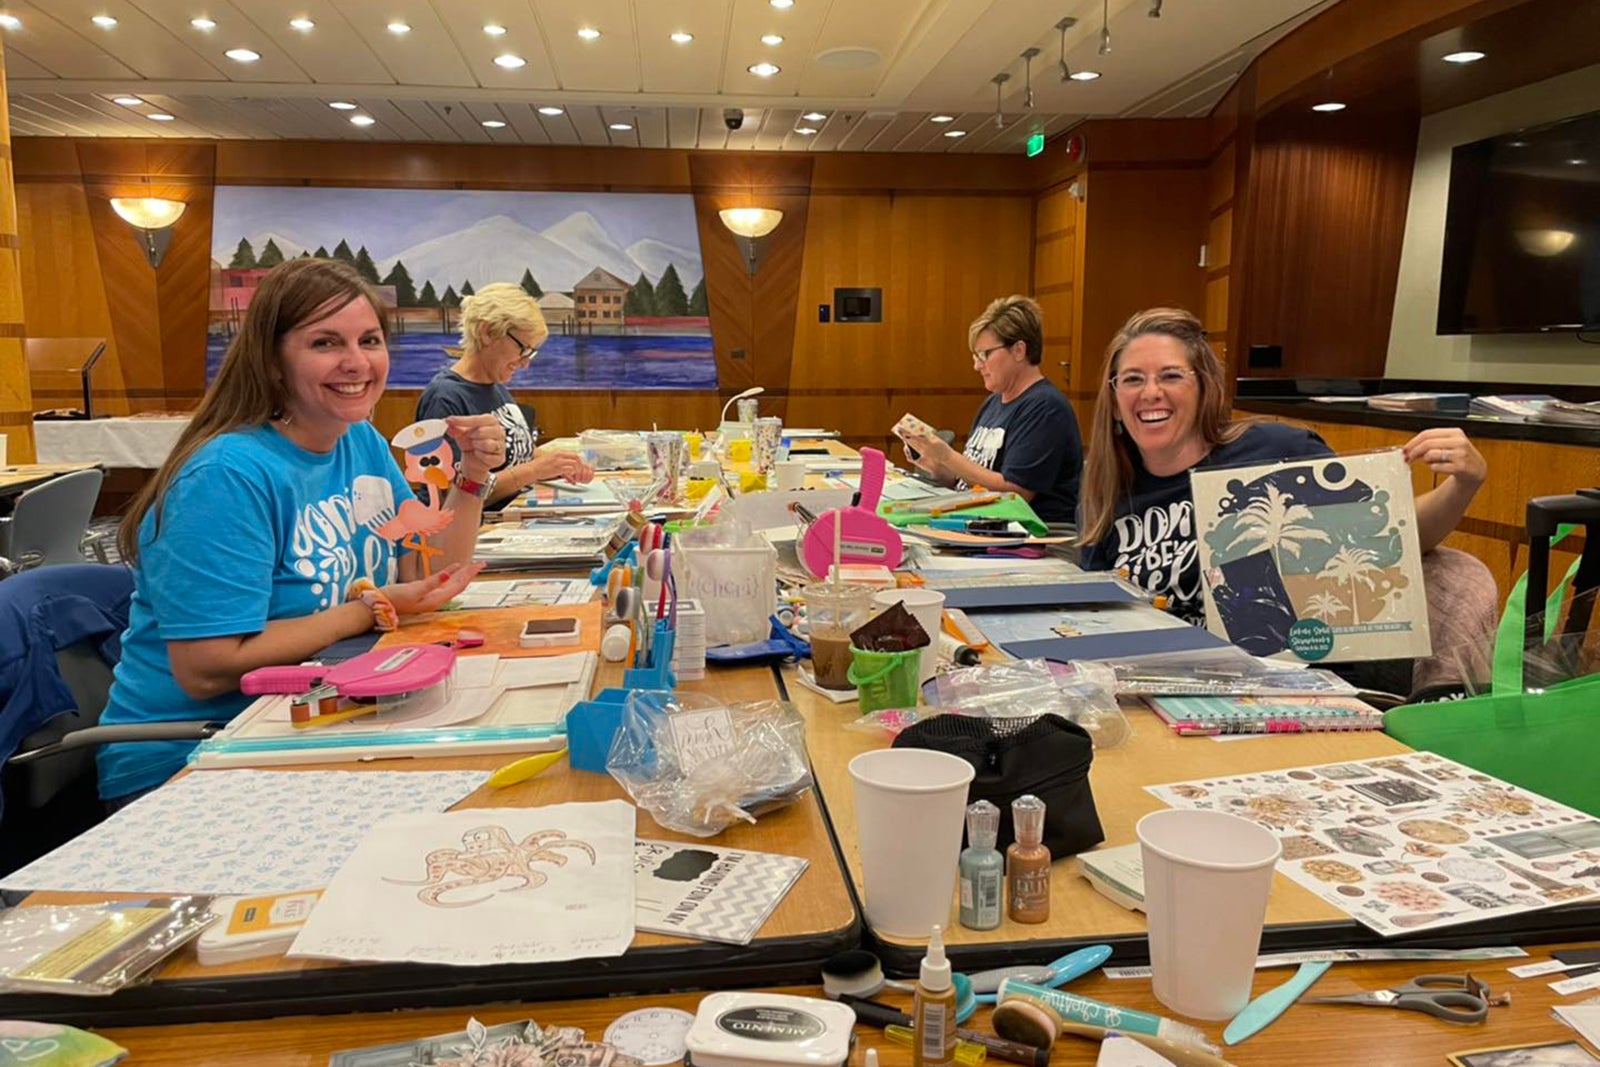 cruise themed crafts